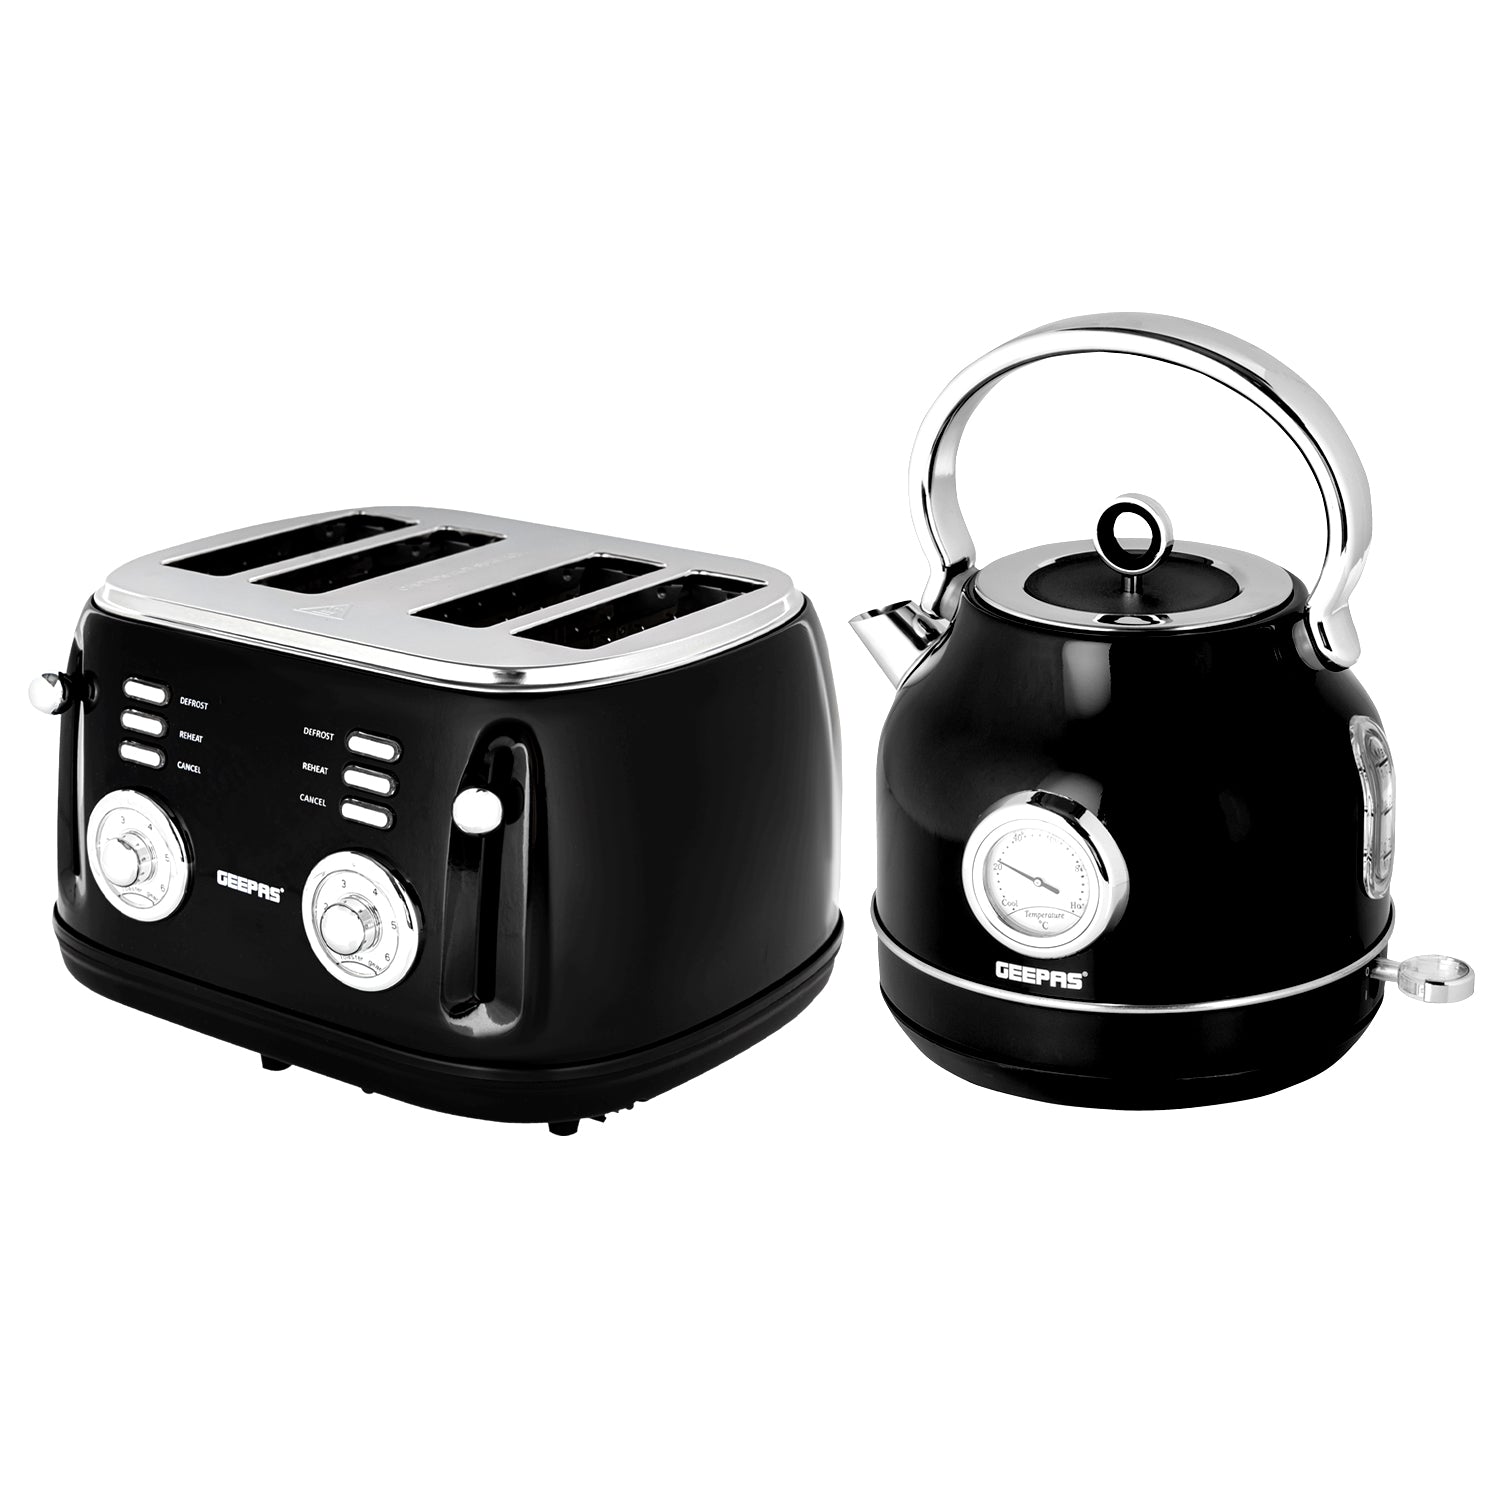 Cordless Electric Kettle & 4 Slice Bread Toaster Kitchen Set Kettle & Toaster Set Geepas | For you. For life. 